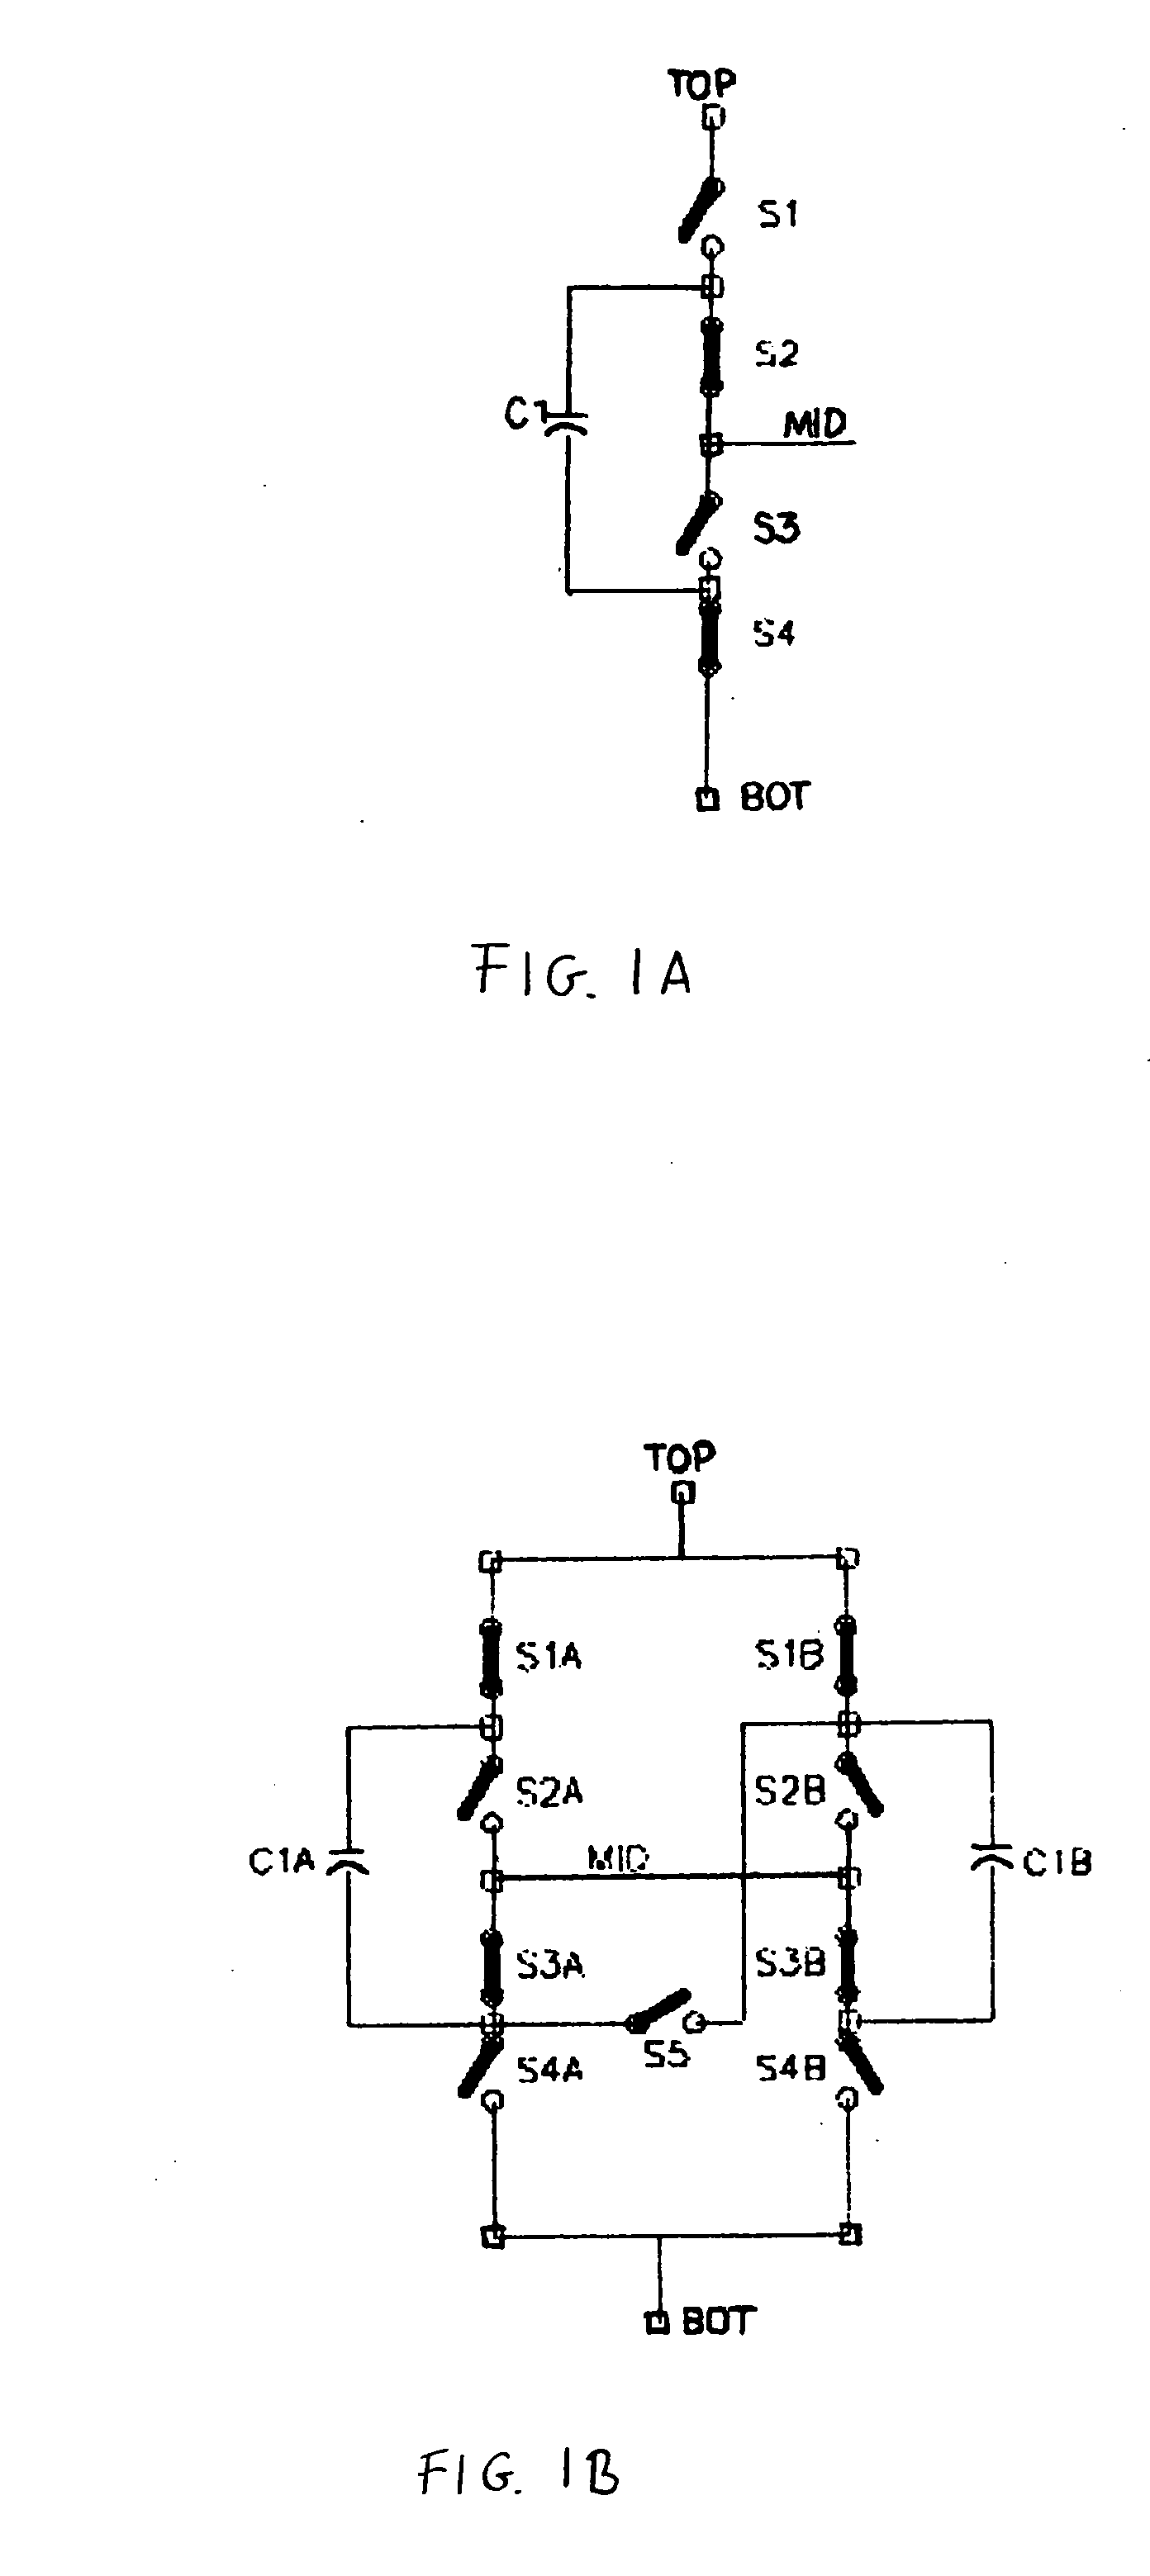 Digital loop for regulating DC/DC converter with segmented switching